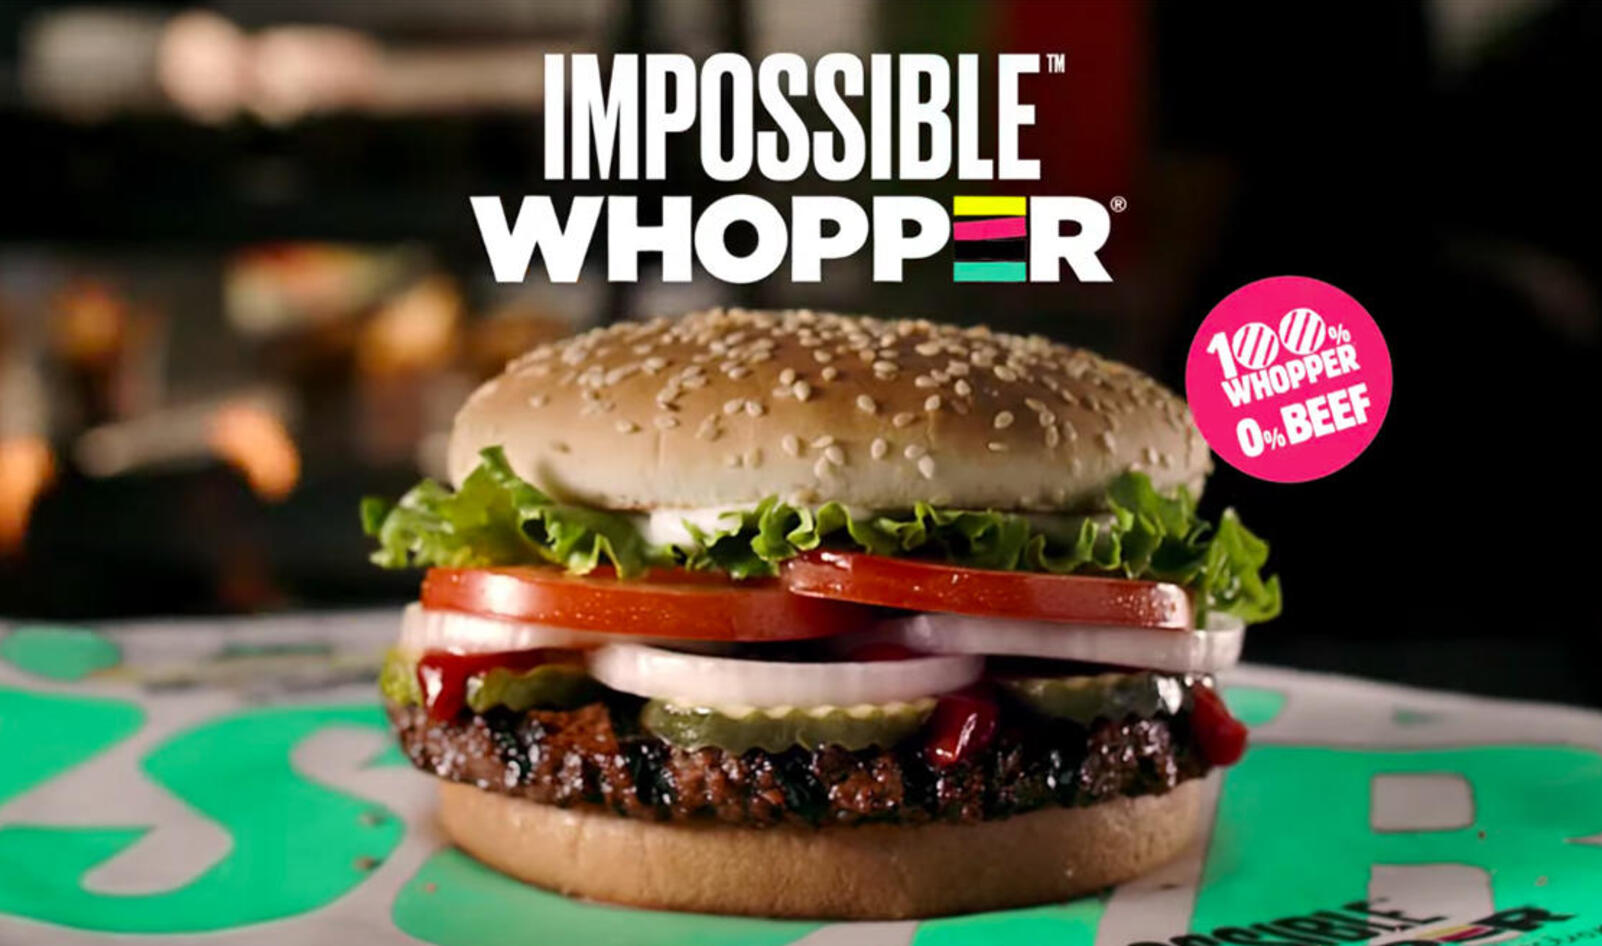 Impossible Whopper Brings 18.5 Percent More Foot Traffic to Burger King